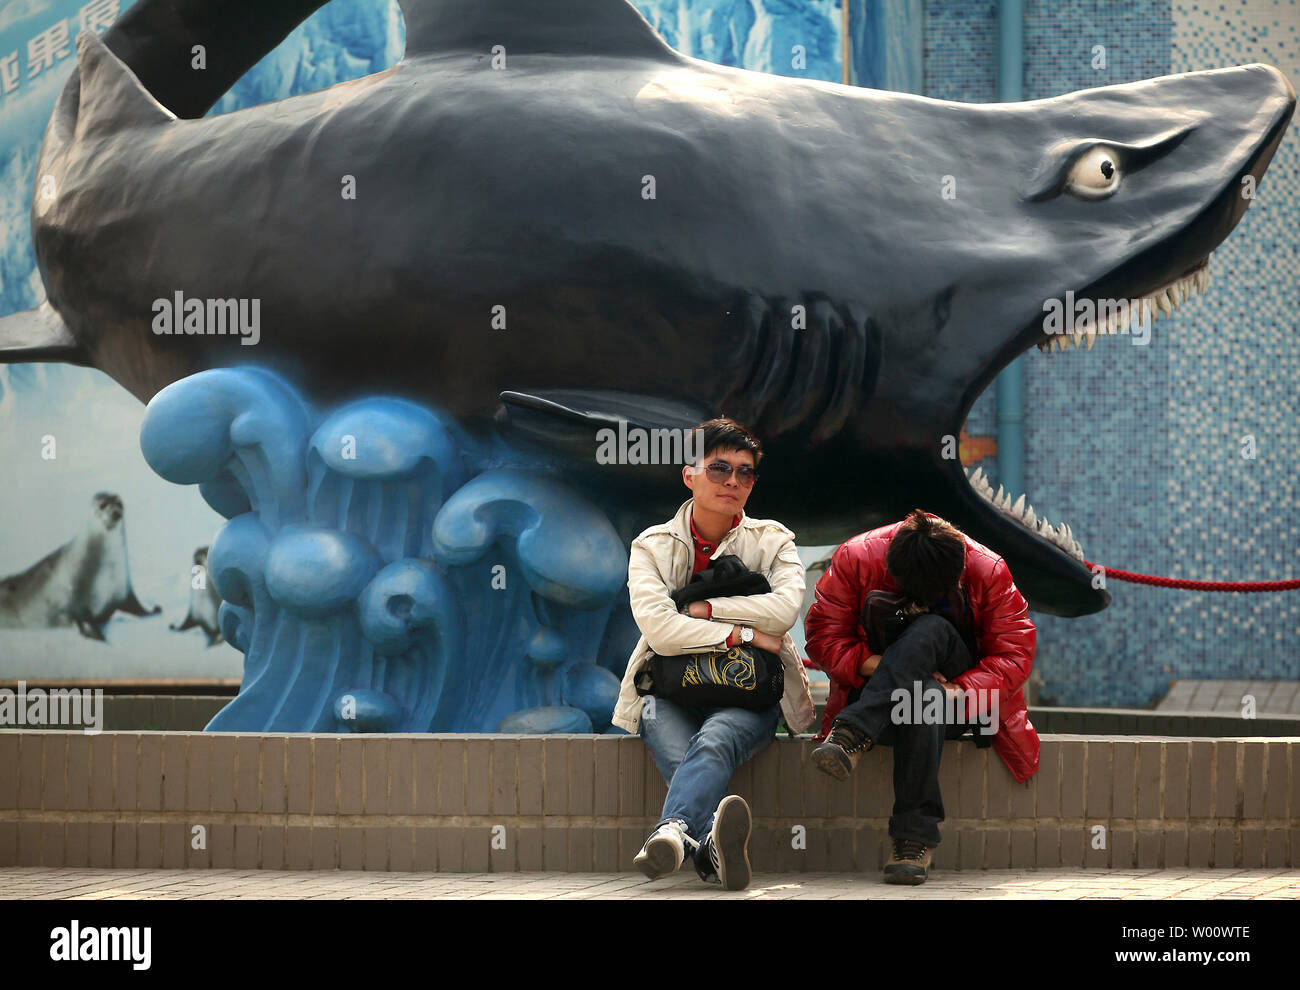 Chinese men wait outside Beijing's Blue Zoo aquarium, the largest of its  type in Asia, on March 31, 2011. The aquarium's main tank holds 3.5 million  liters of artificially produced salt water